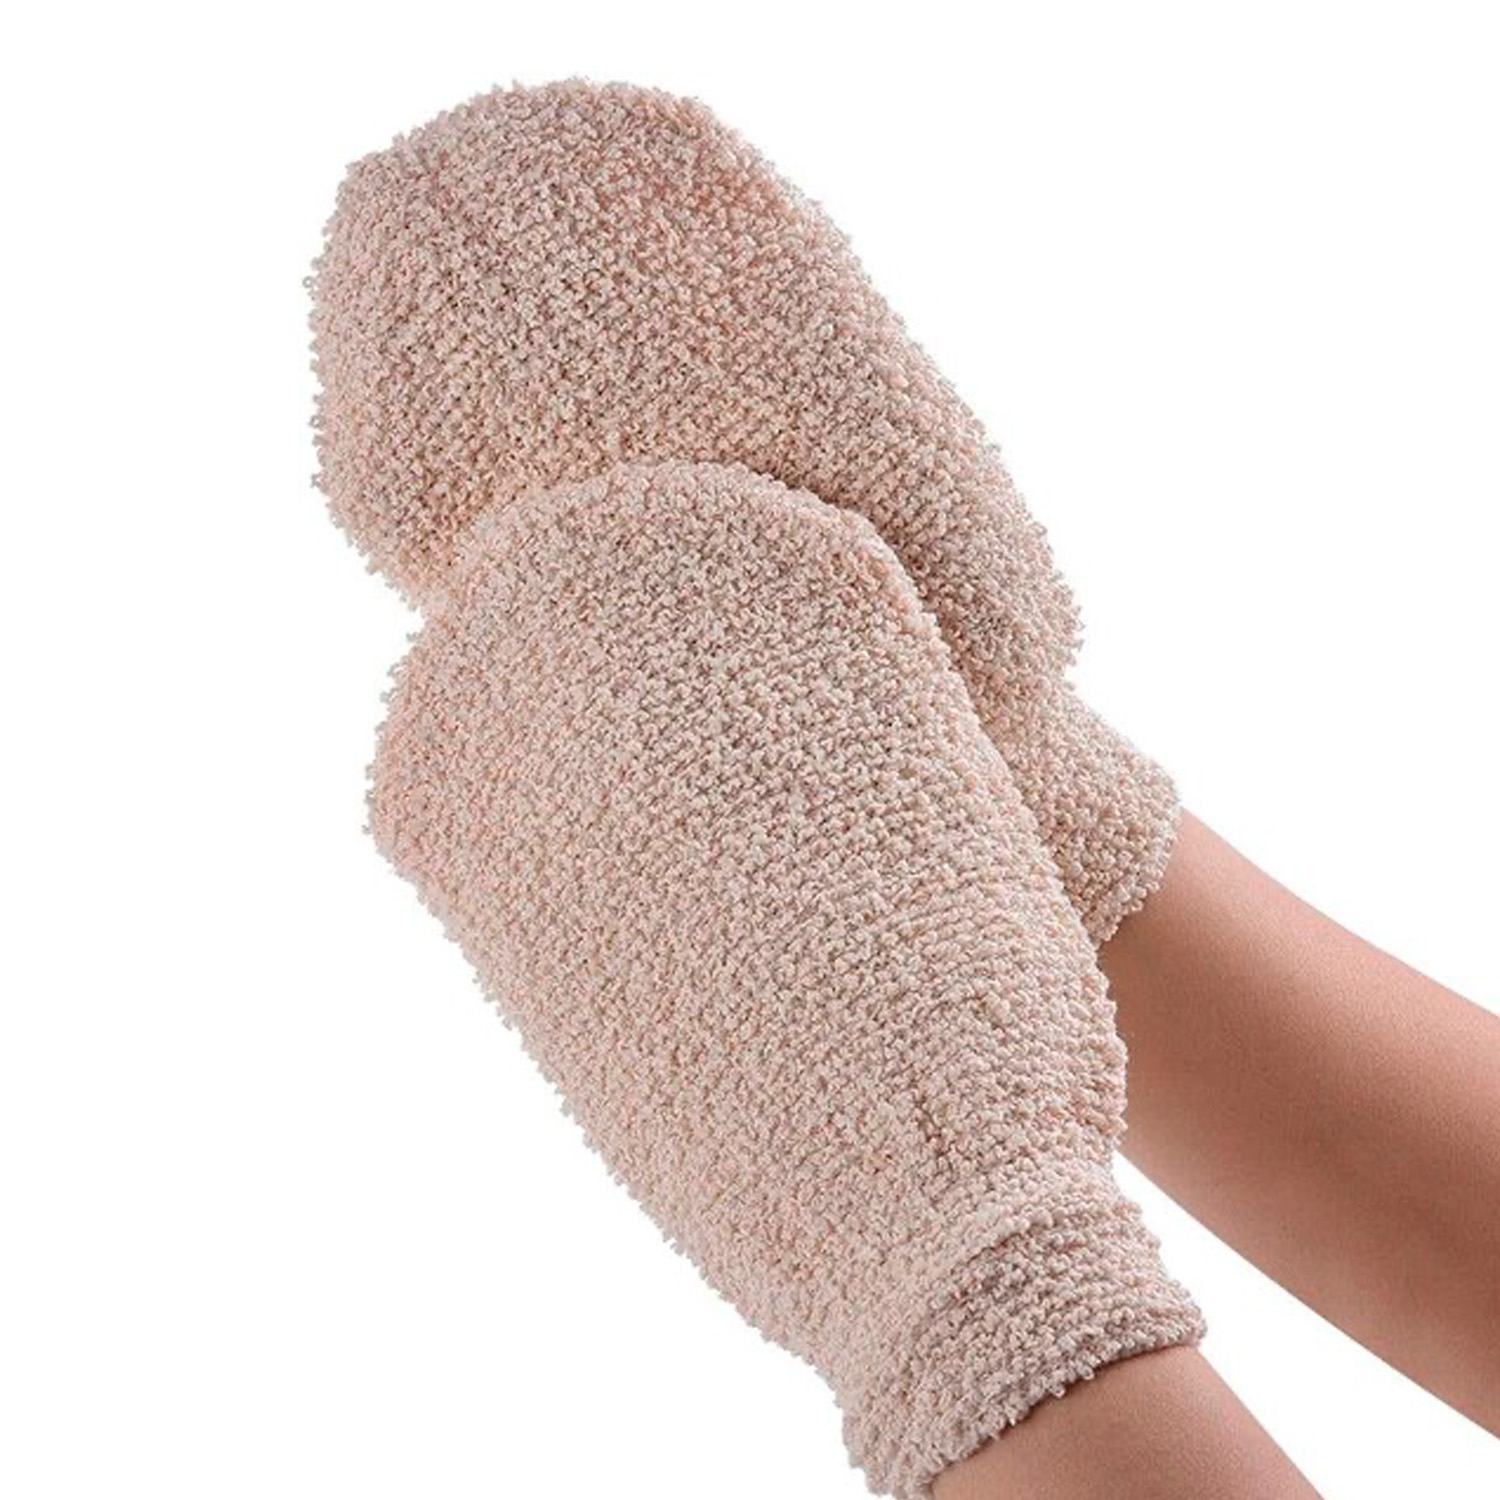 Exfoliating Gloves Made with Bamboo